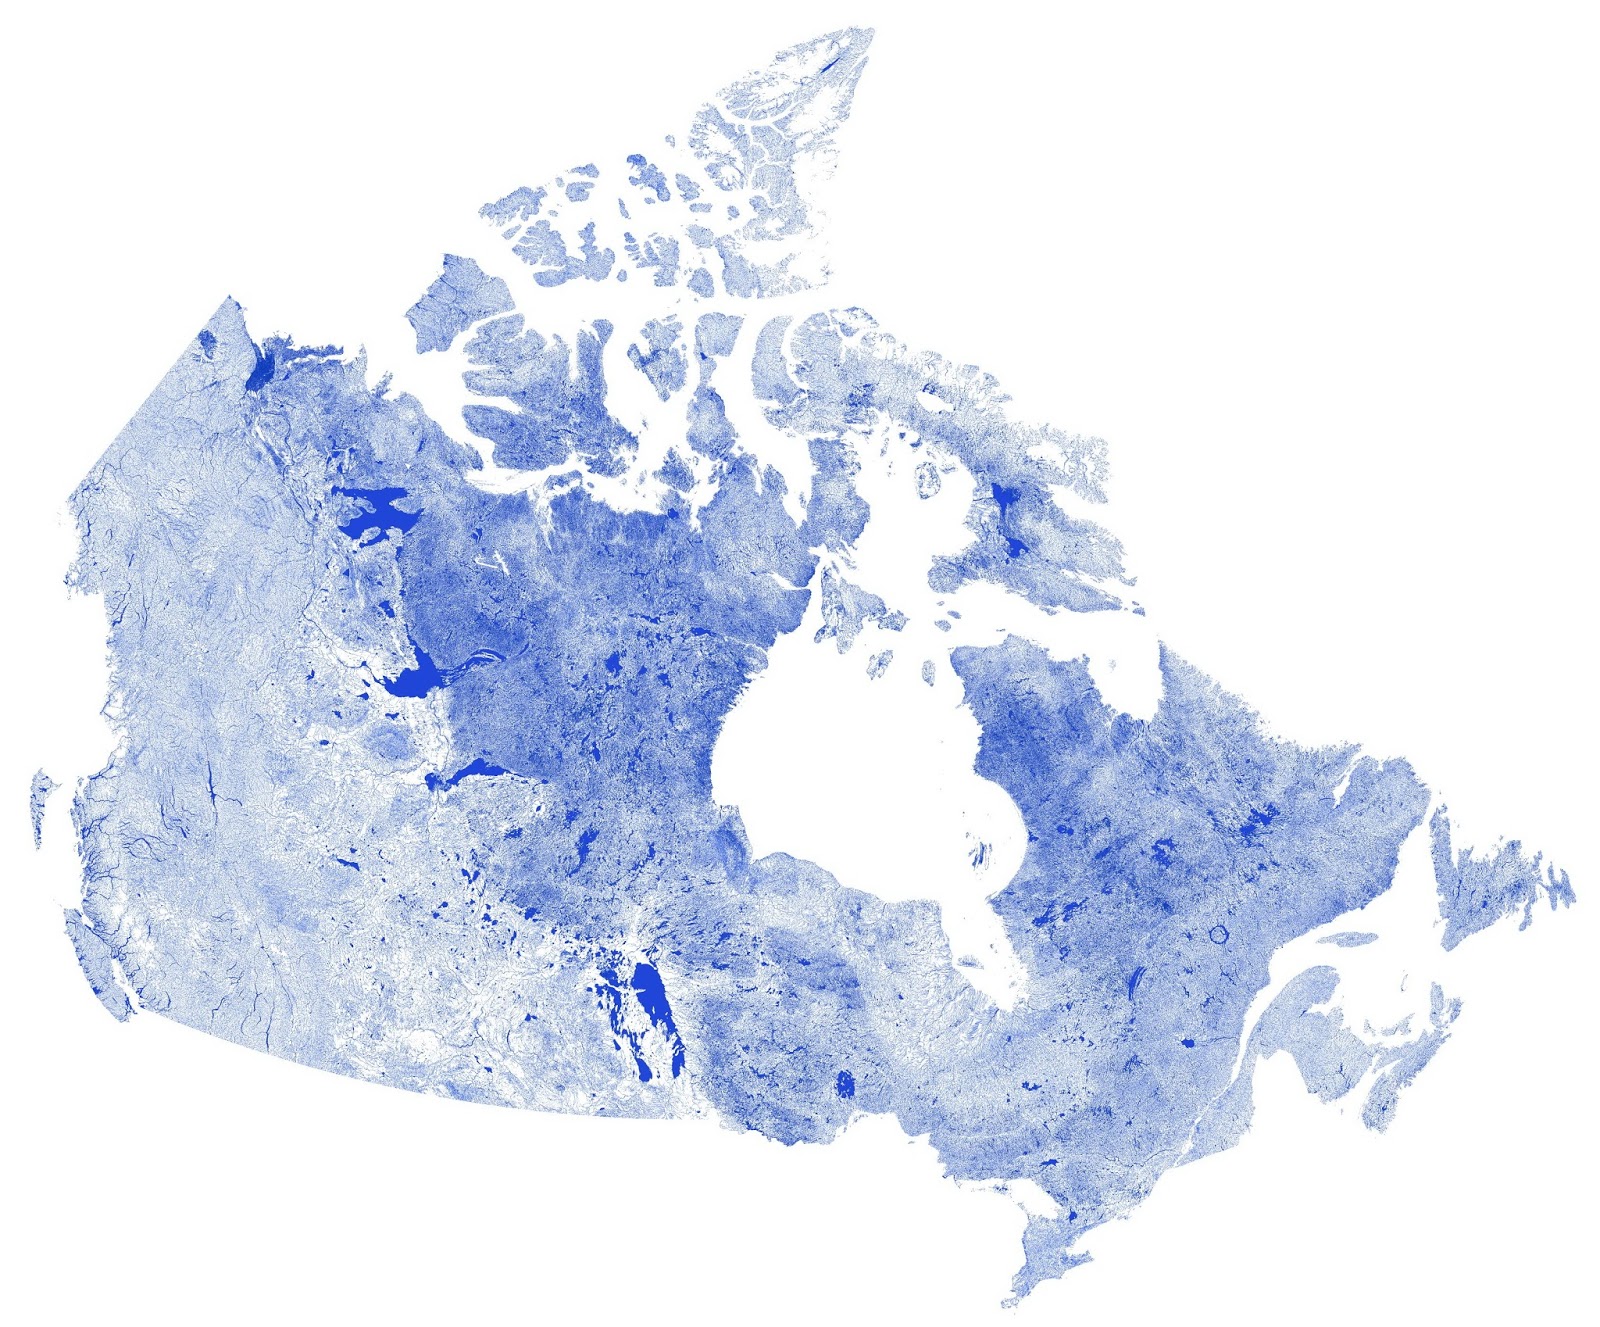 Canada mapped only by rivers, streams & lakes